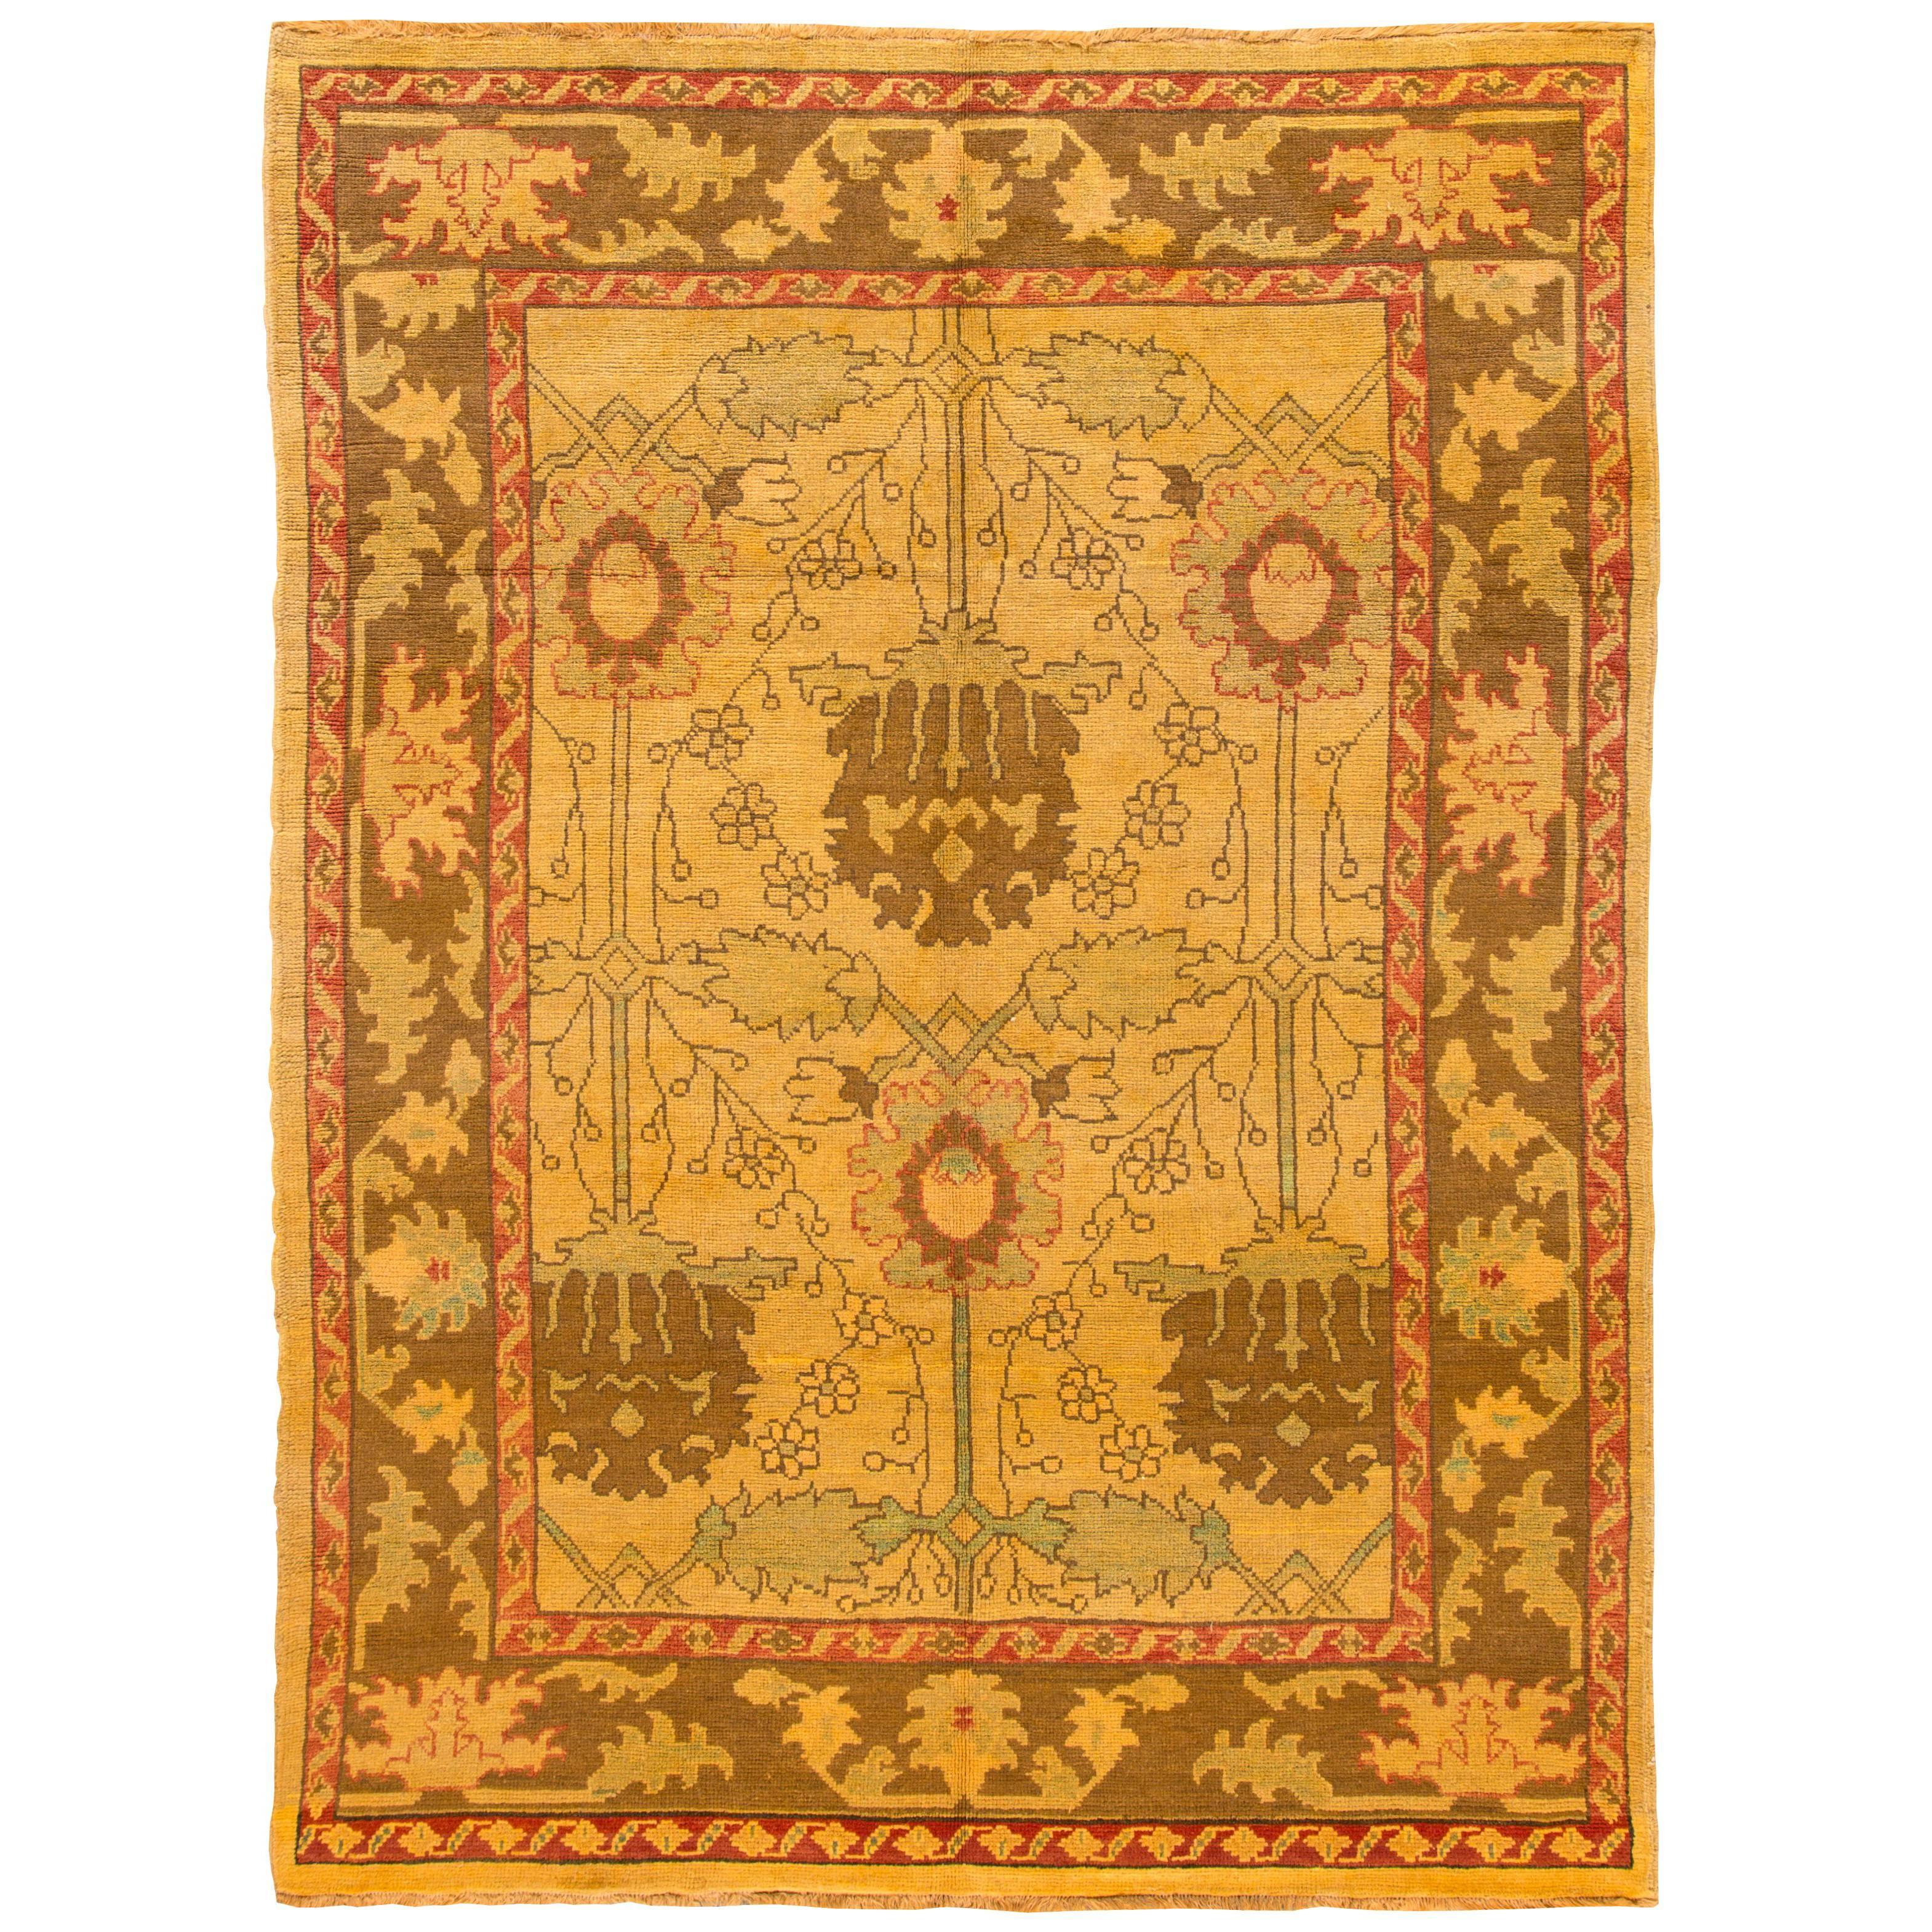 Highly Contrasted Vintage Beige Oushak-Style Rug, 7.11x10.09 For Sale